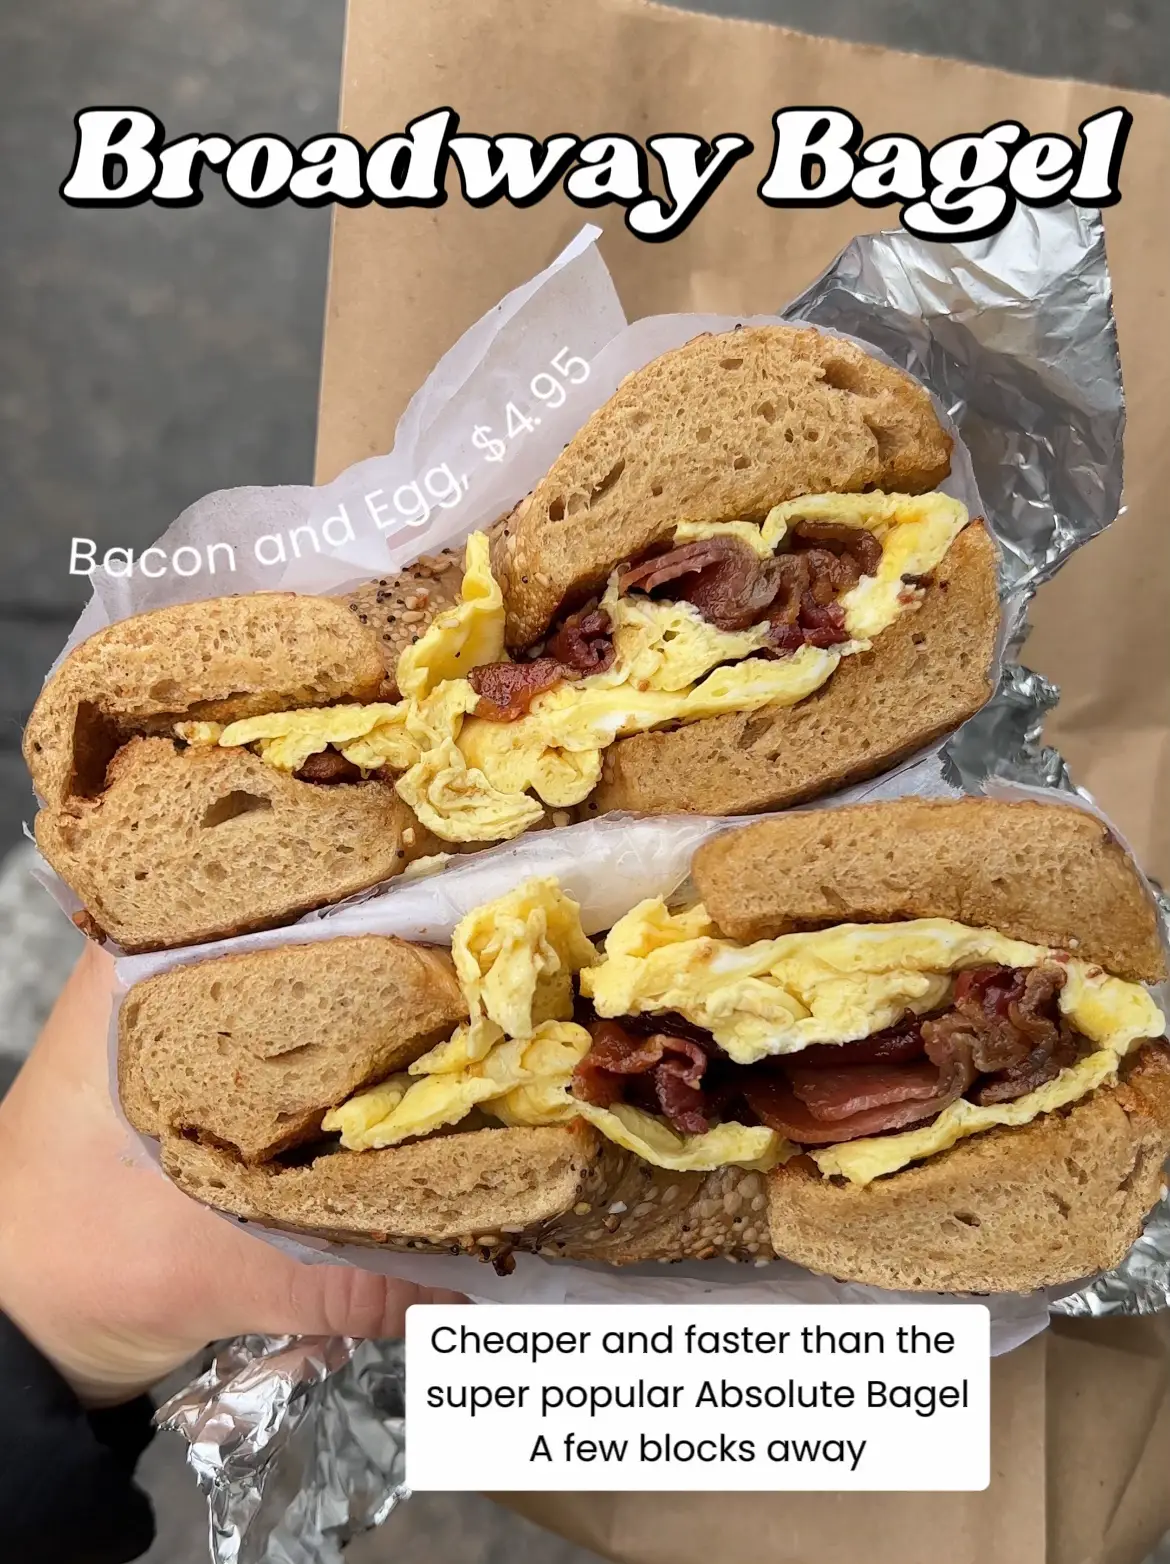  A person is holding a sandwich that includes egg, bacon, and cheese. The sandwich is placed on a piece of tin foil.